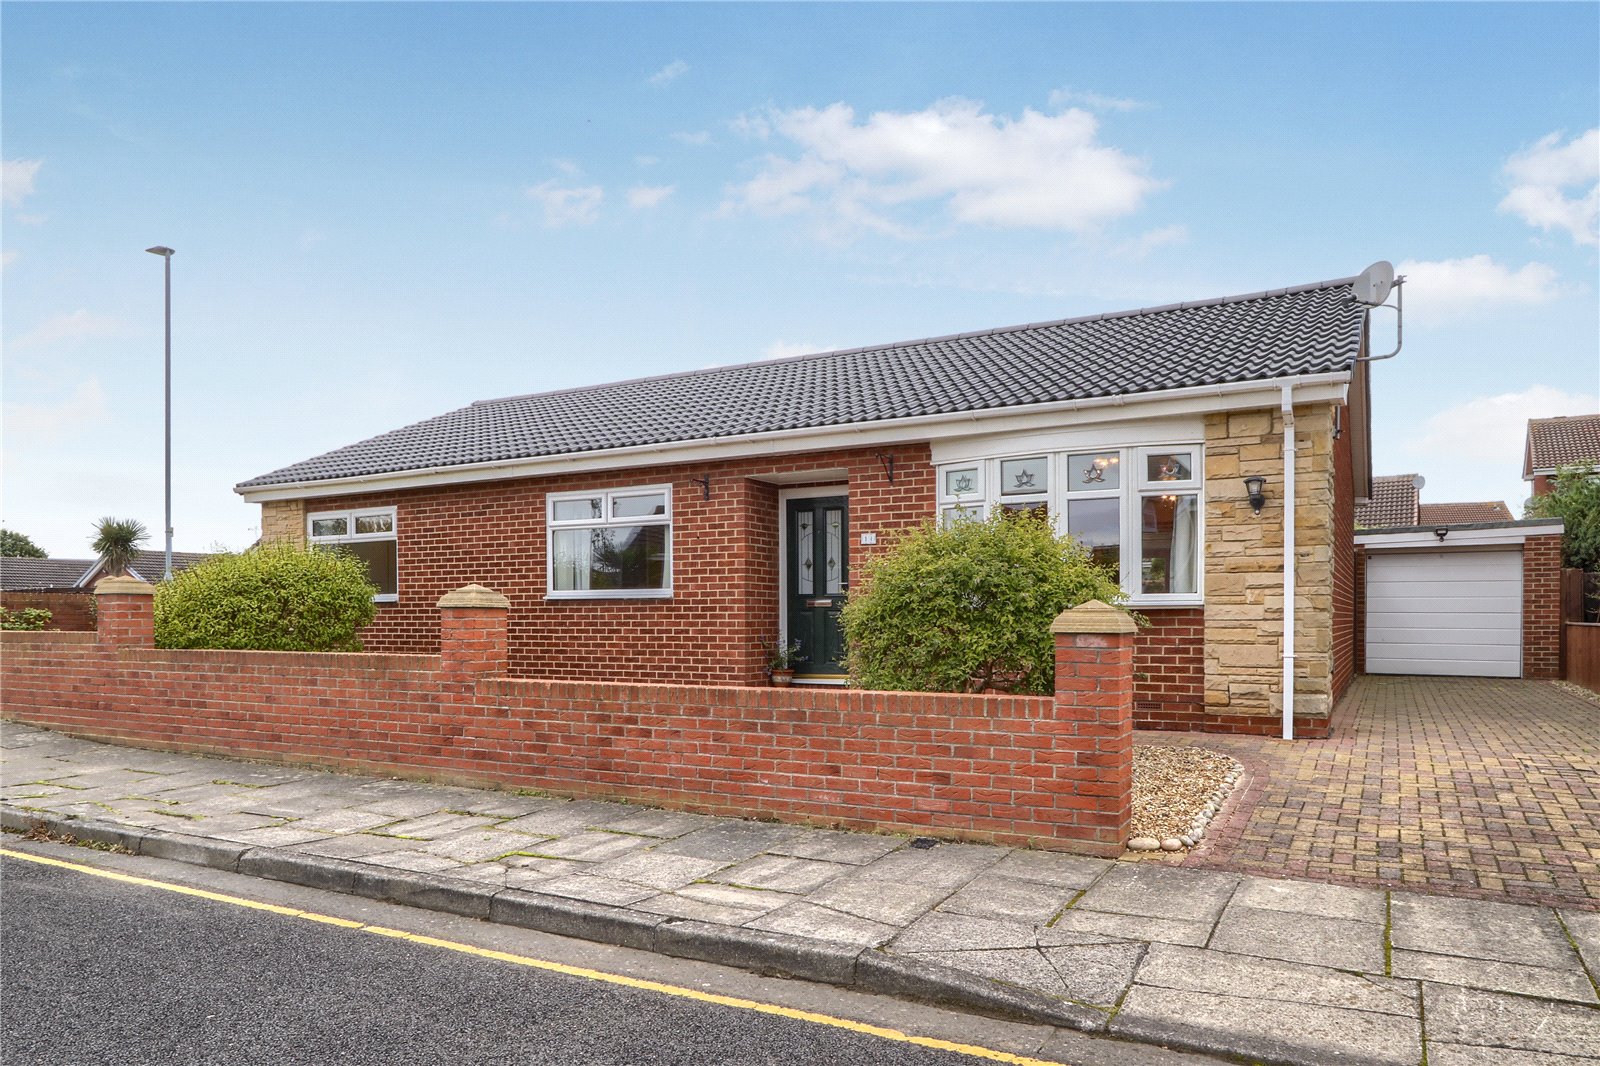 3 bed bungalow for sale in Dillside, Elm Tree  - Property Image 1